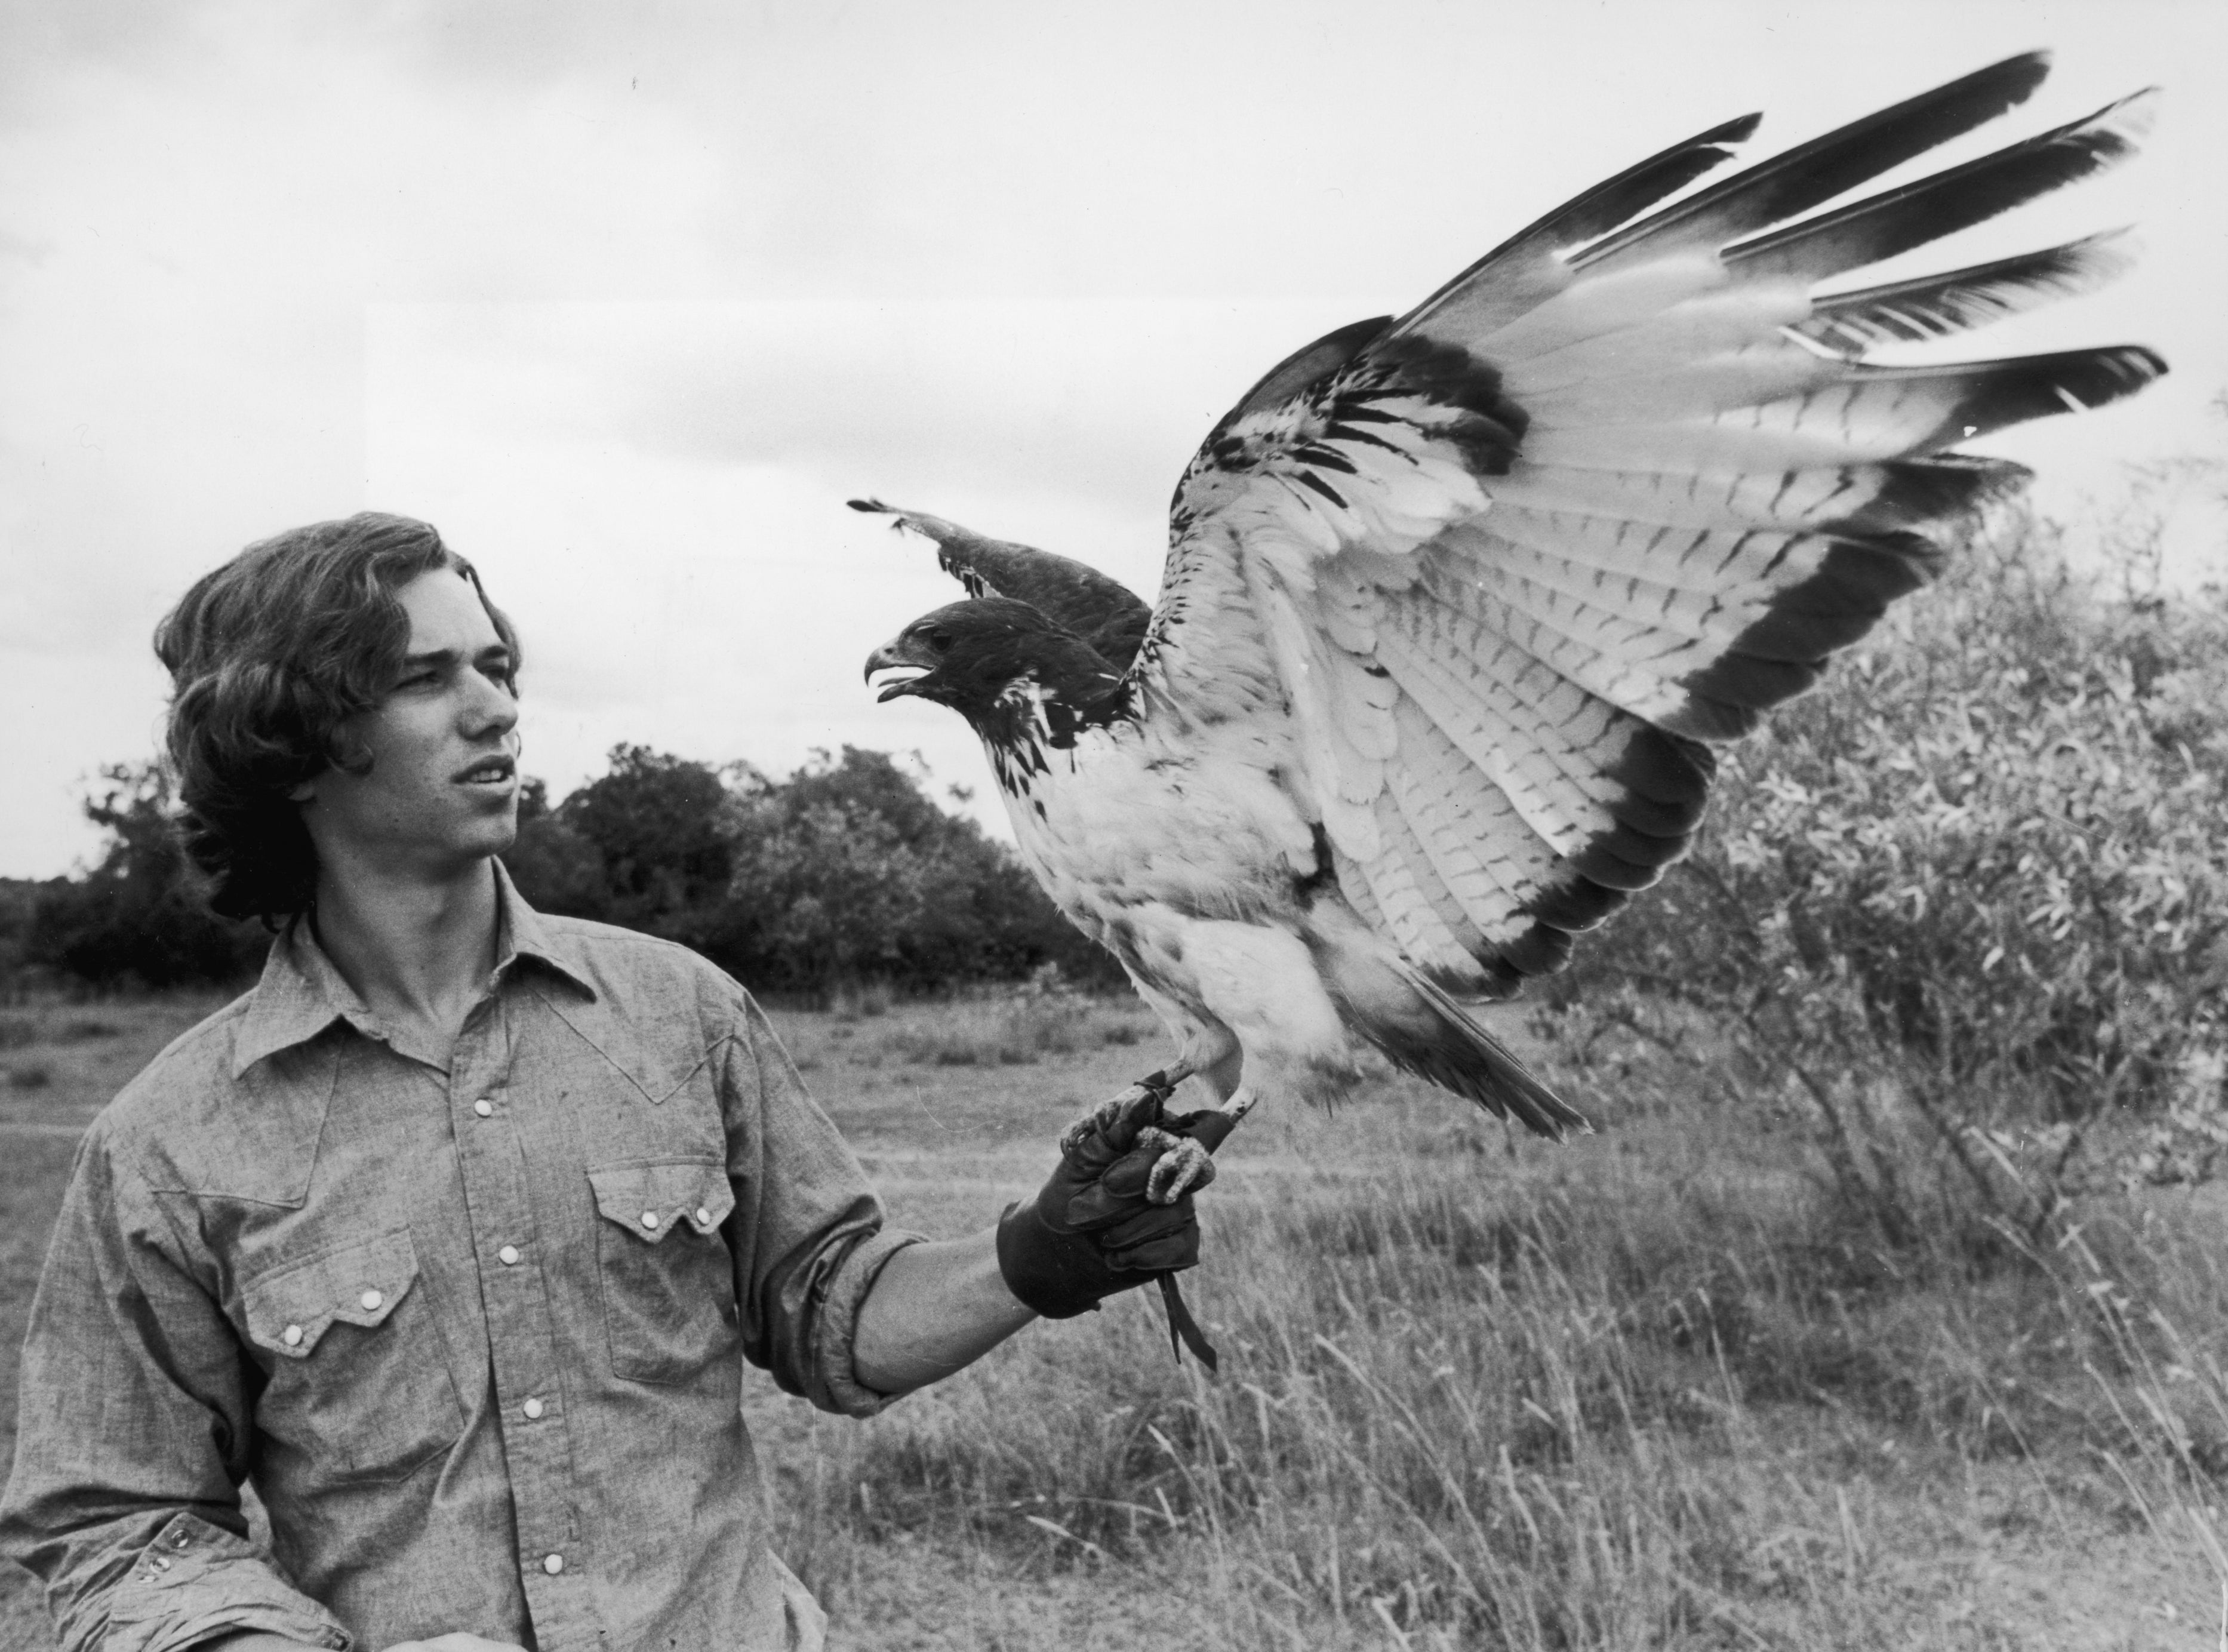 Robert F Kennedy Jr, pictured in 1974 in Kenya, was long a prominent and respected environmentalist